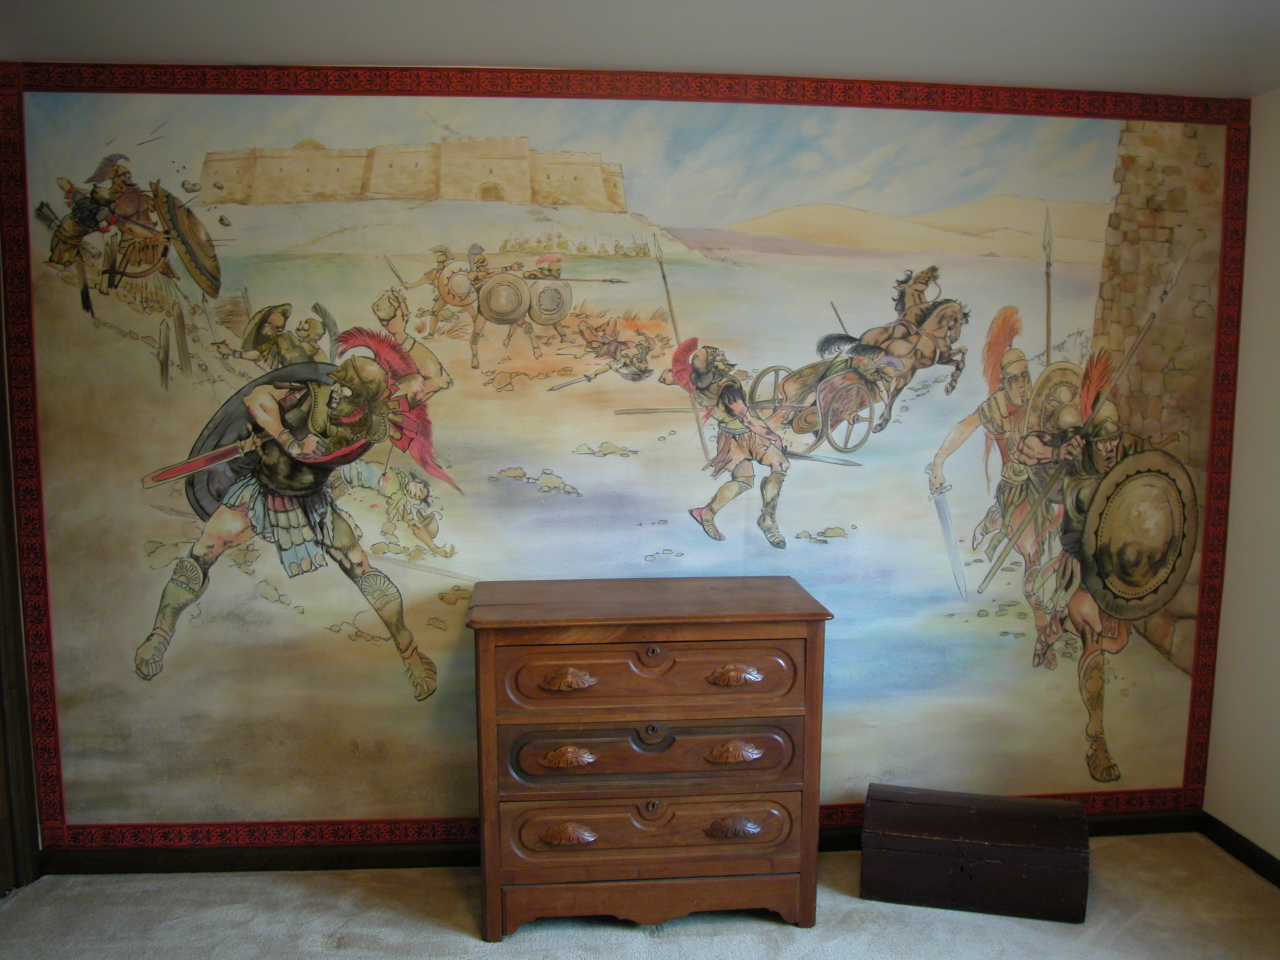 gladiator mural applied to wall